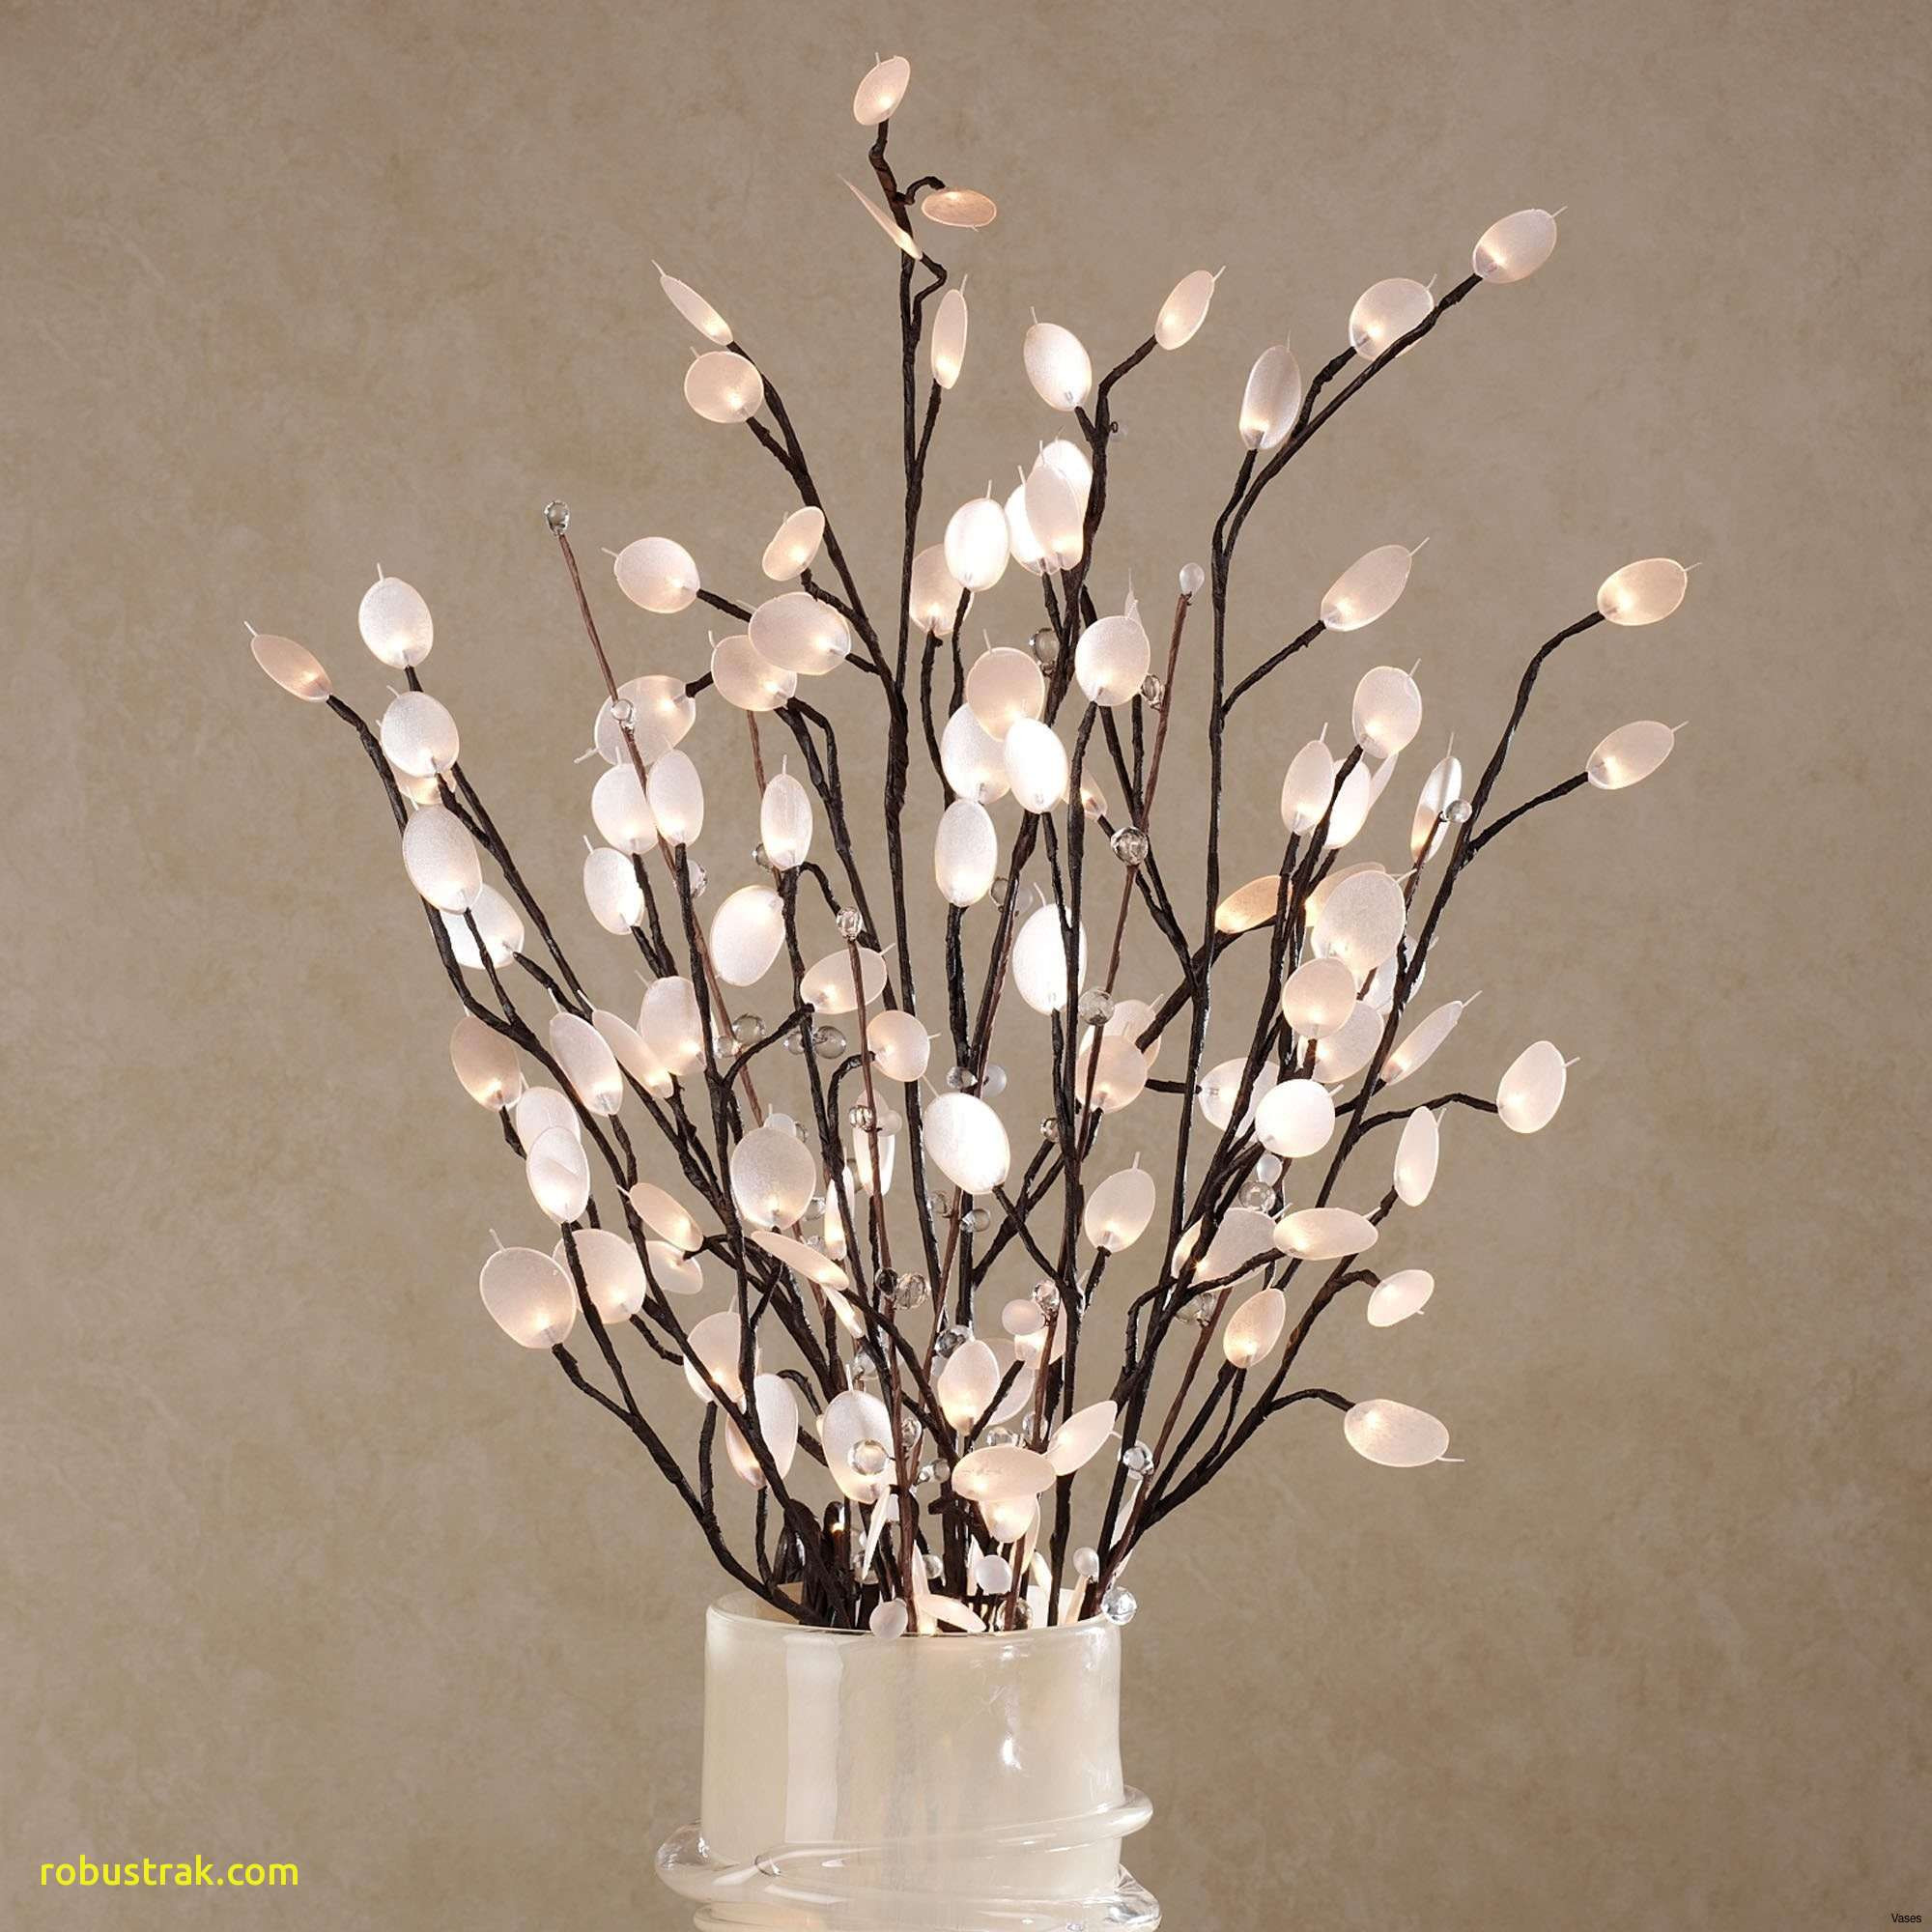 21 Amazing Artificial Flowers In Clear Vases 2024 free download artificial flowers in clear vases of inspirational decor sticks in a vase home design ideas pertaining to decorative sticks for vases vase with bamboo l bambooi 16d